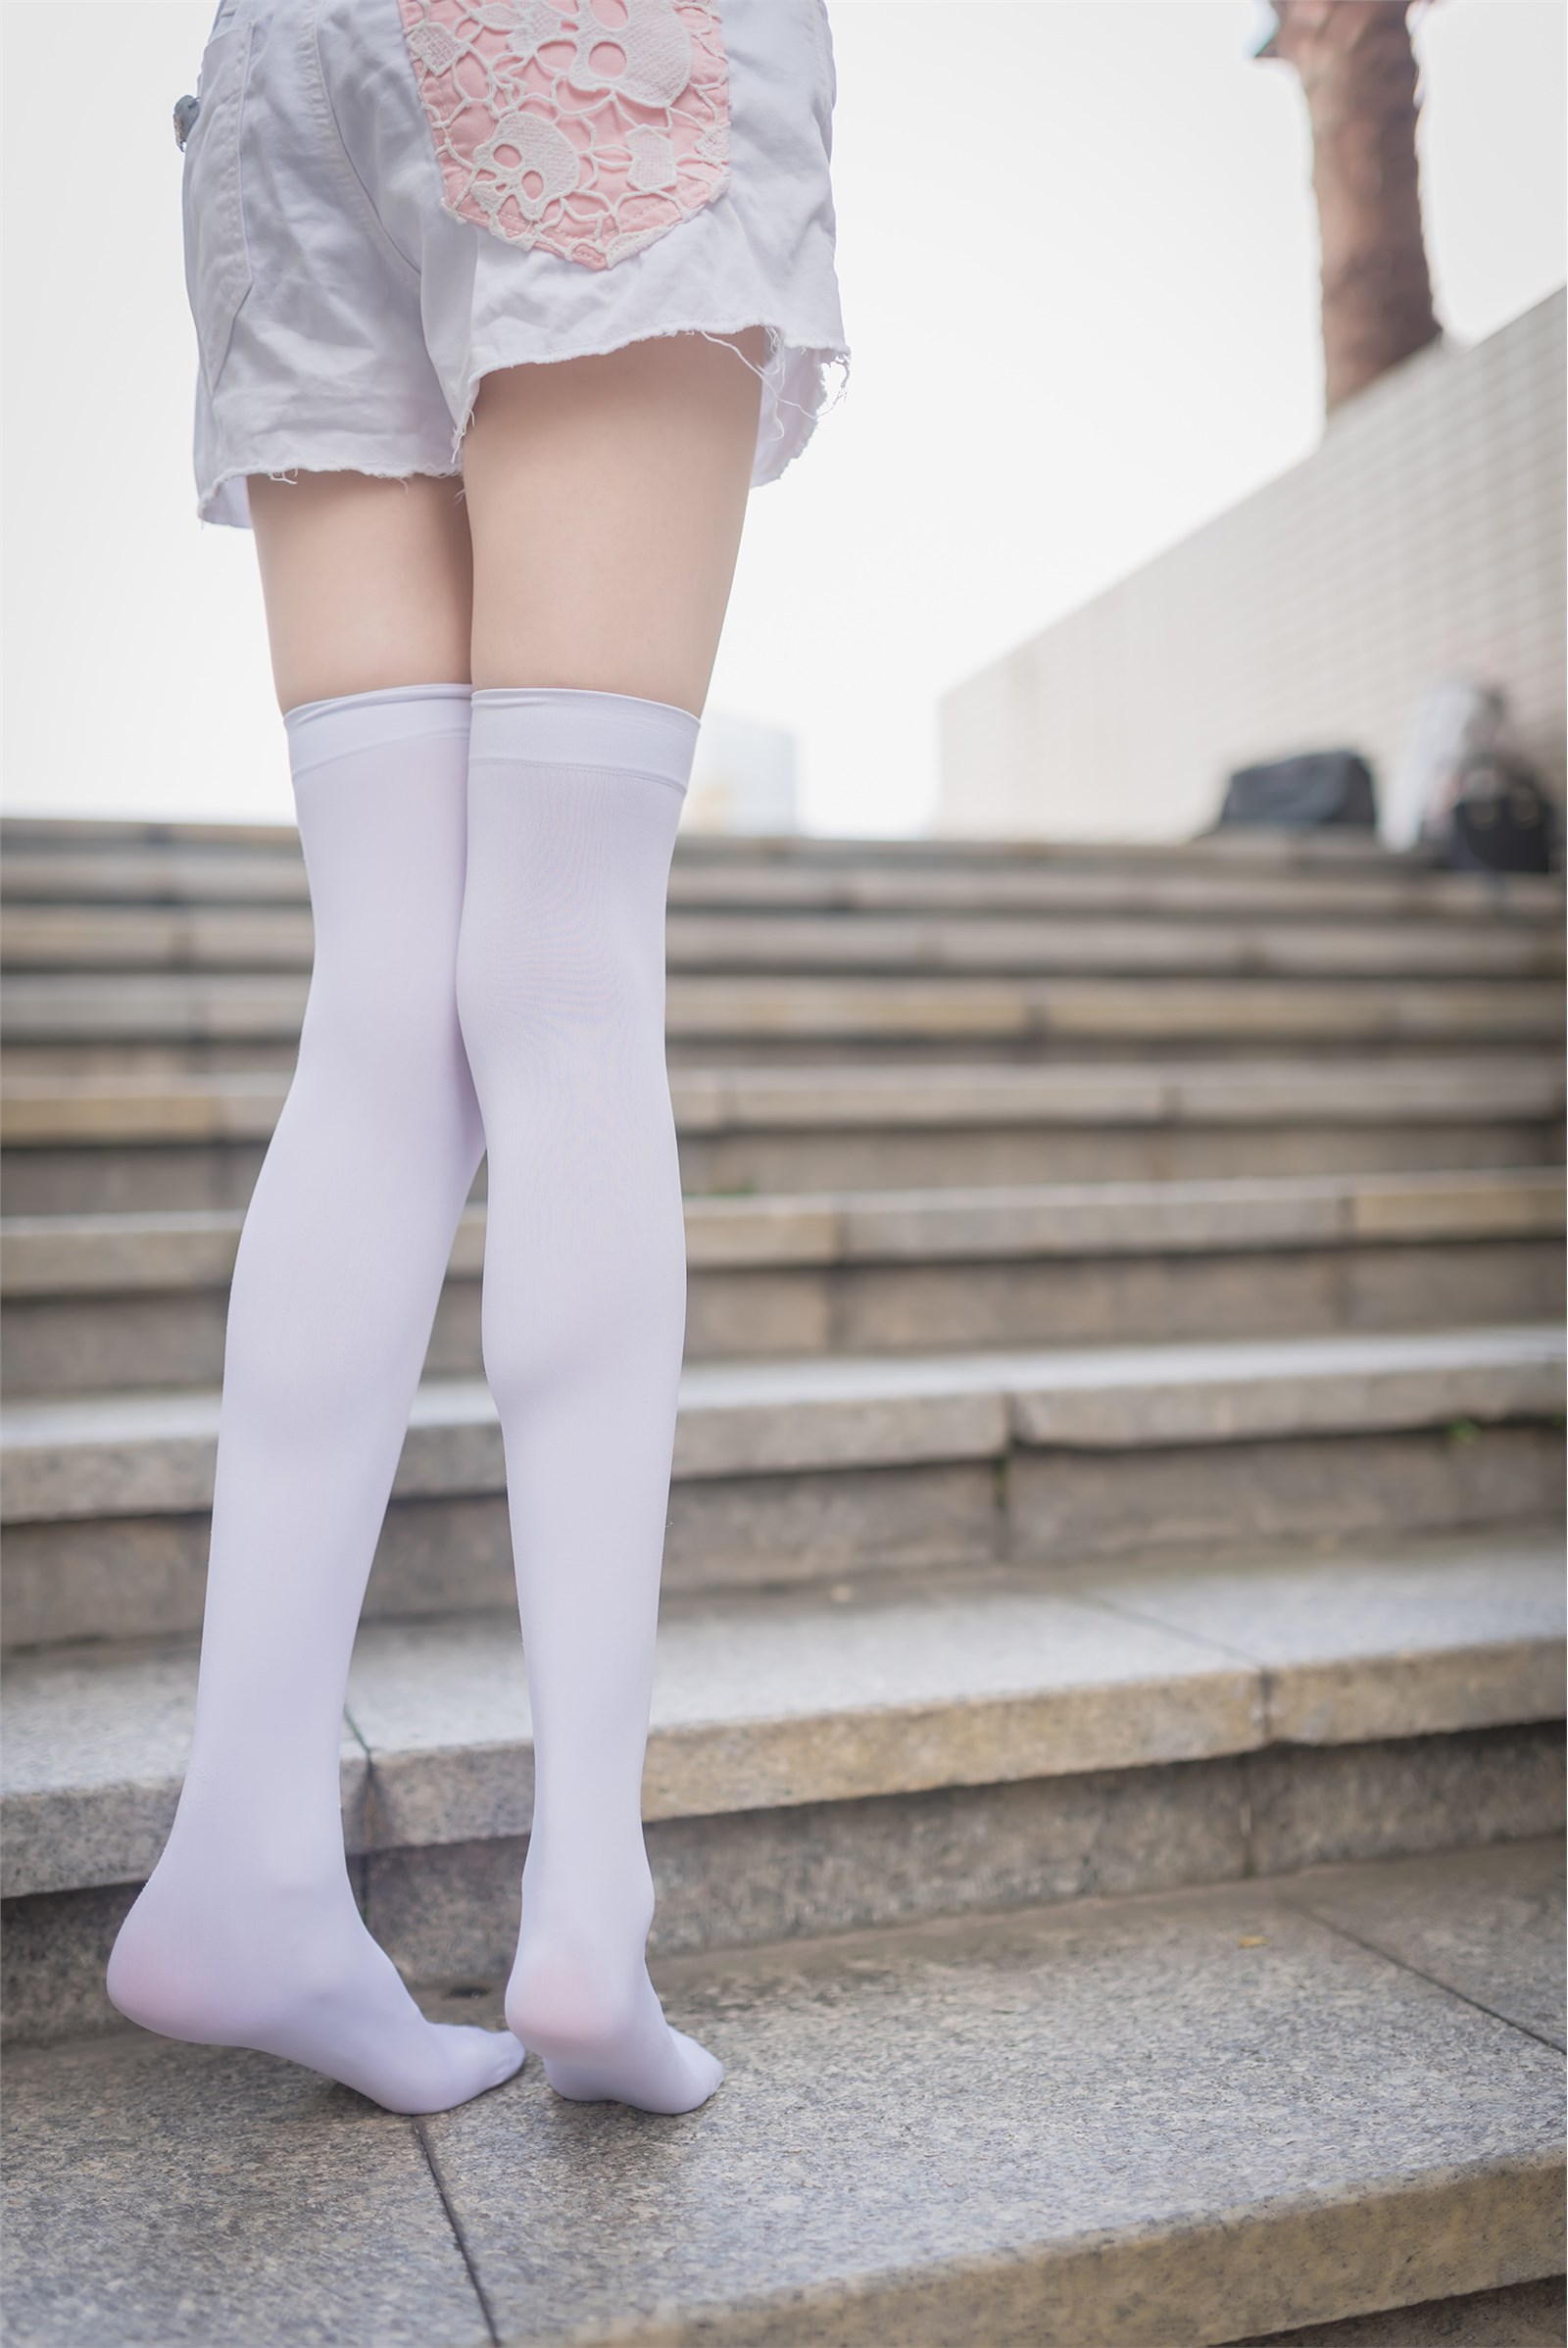 Rabbit plays with painted white stockings over the knee(14)